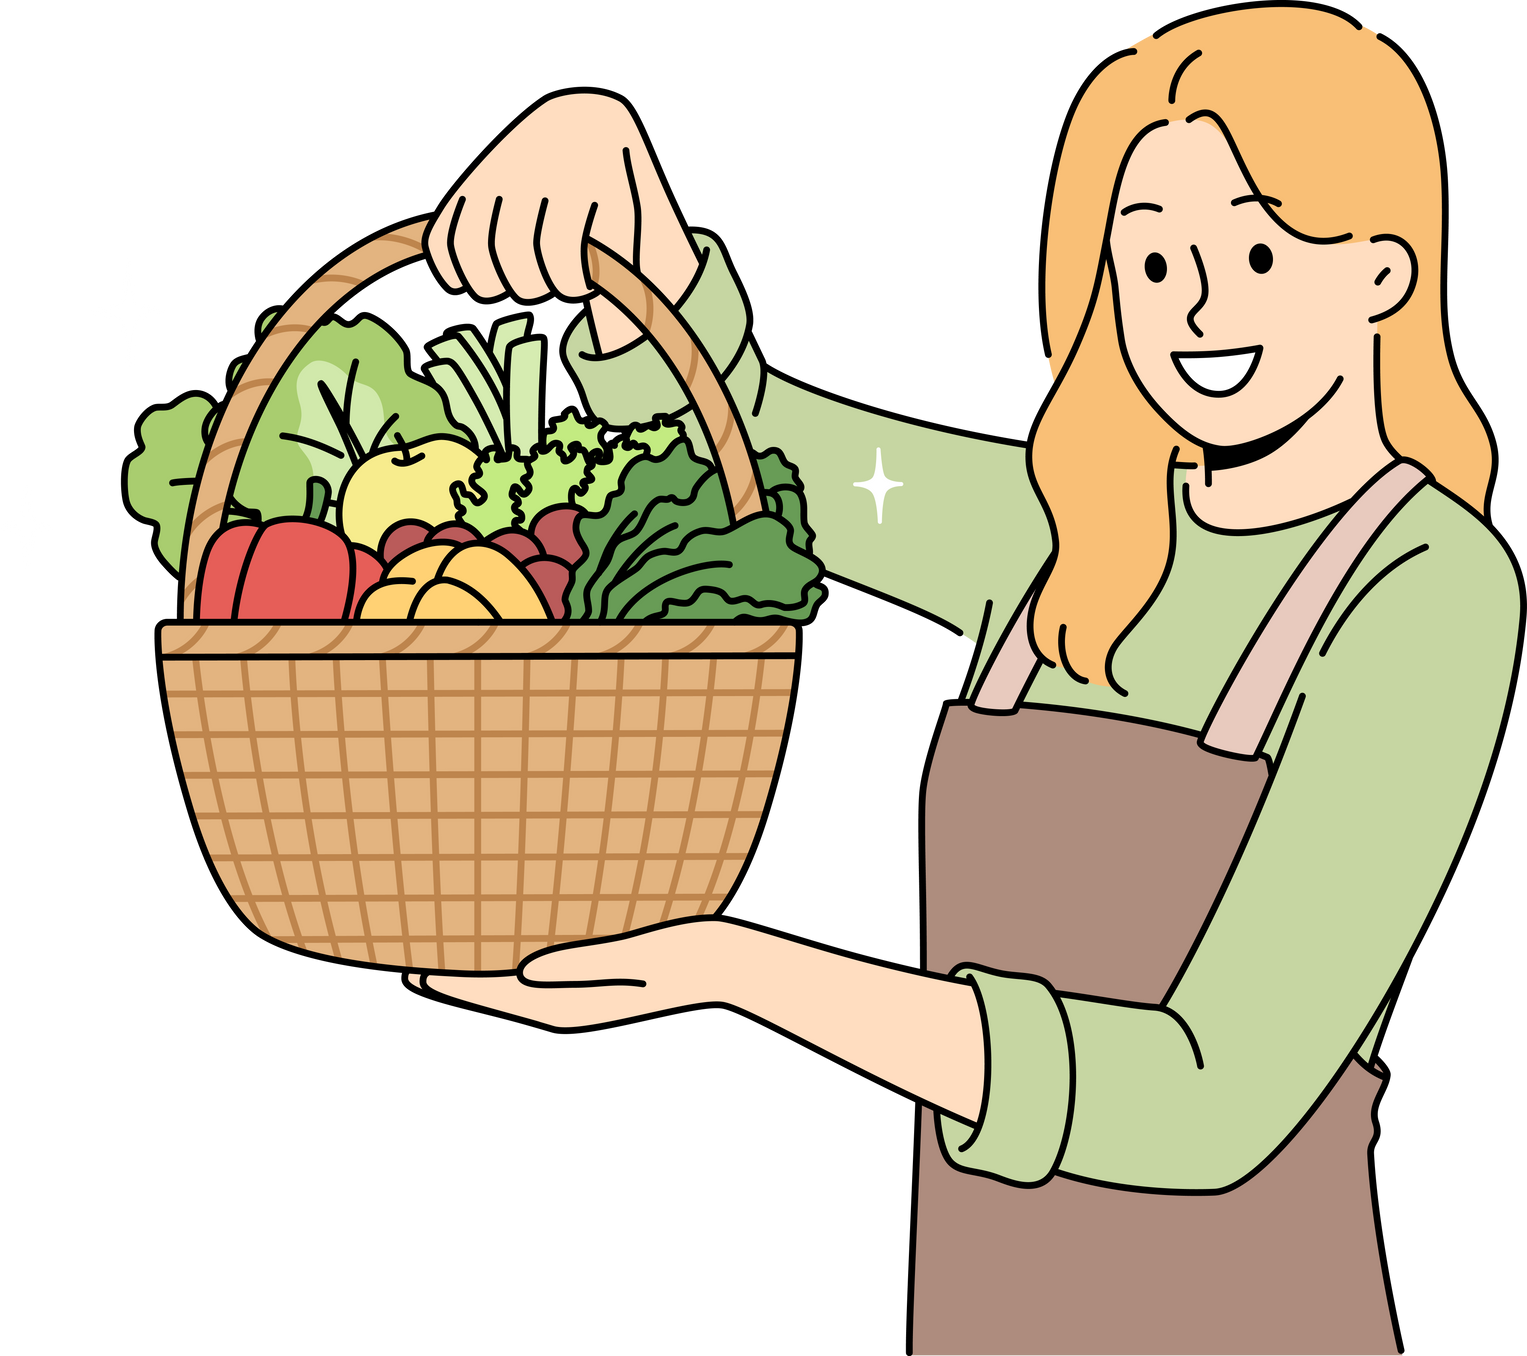 Woman farmer with basket full of vegetables recommends eating natural organic food